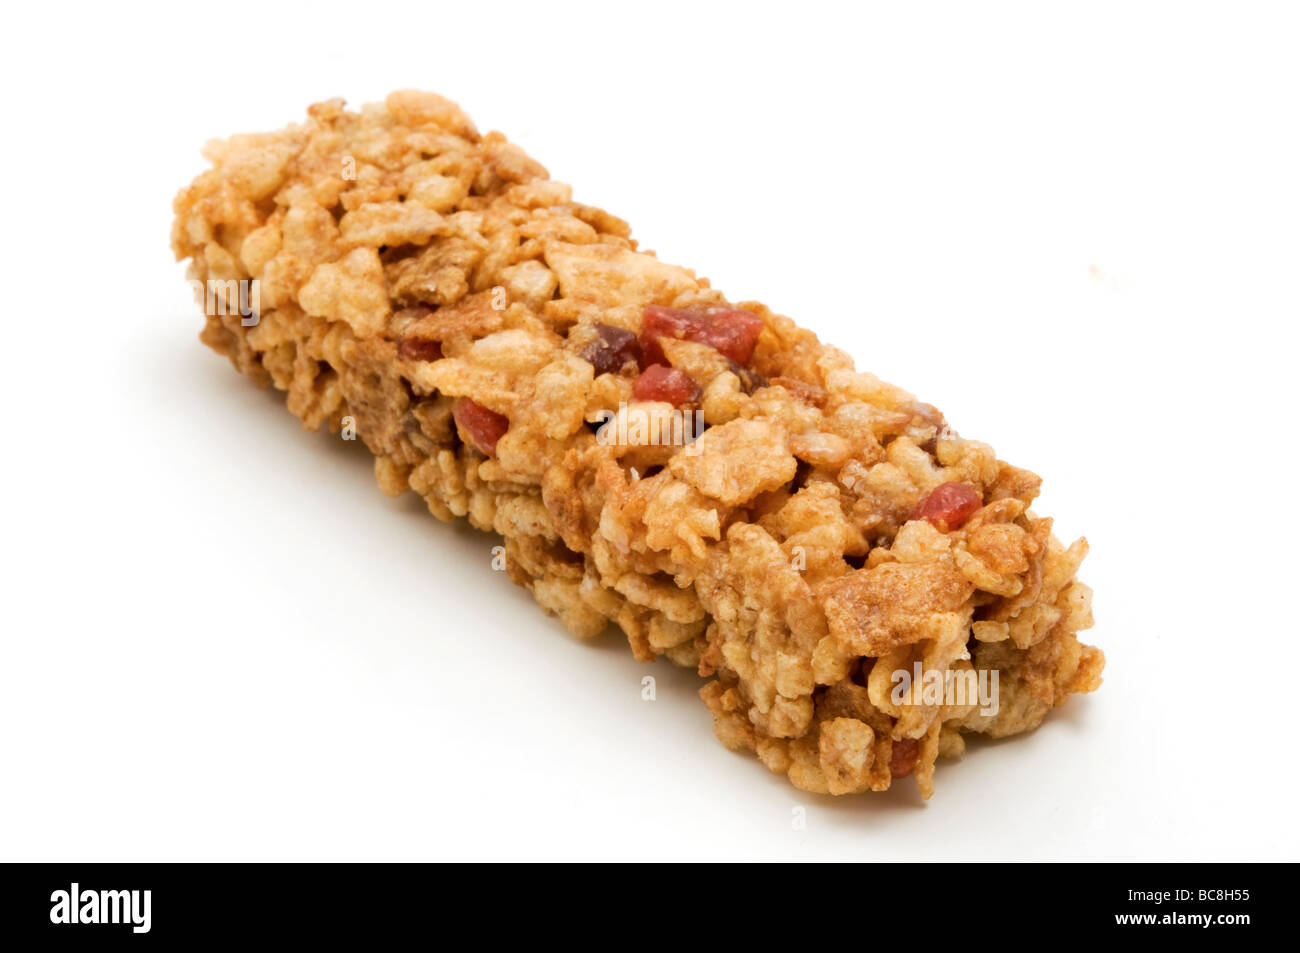 Cereal bar on a white background Stock Photo